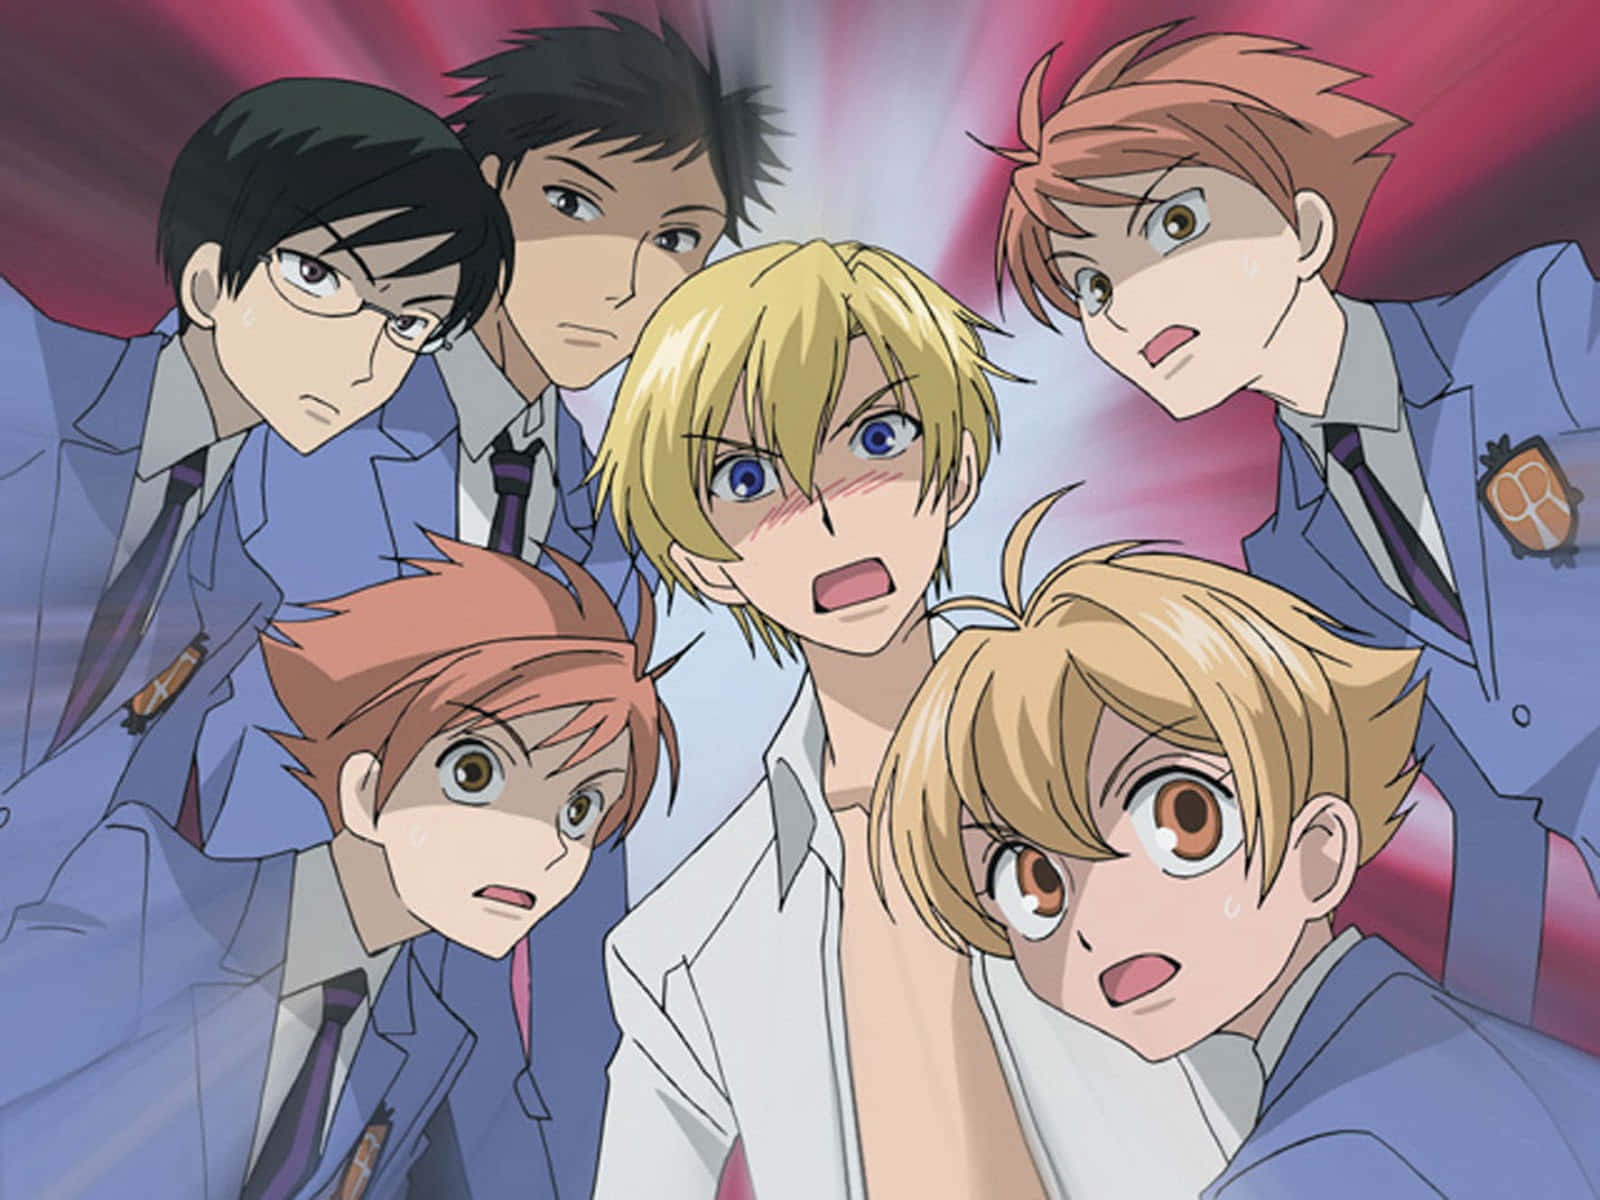 The Ouran High School Host Club members posing together with a cheerful background. Wallpaper